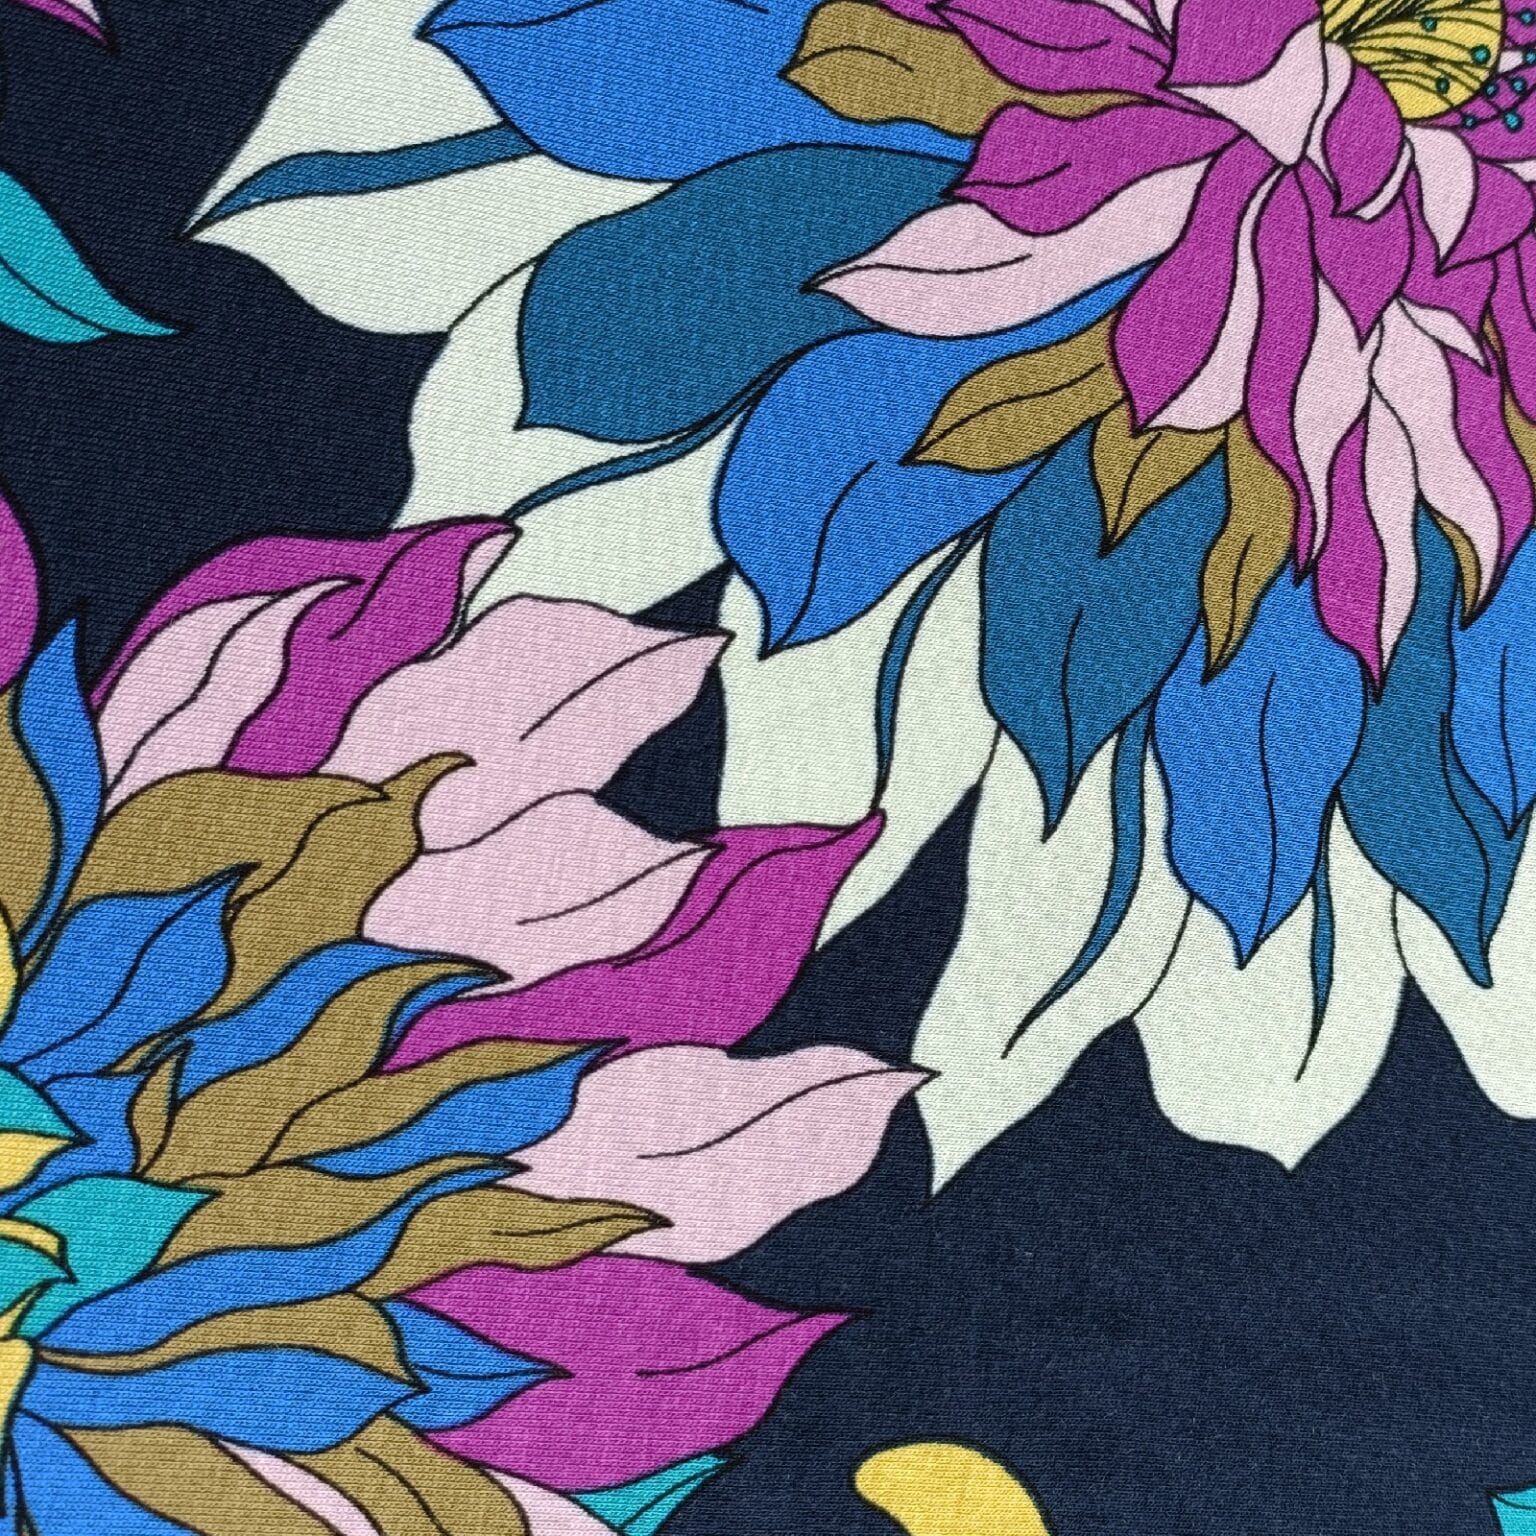 Floral viscose spandex jersey fabric | More Sewing